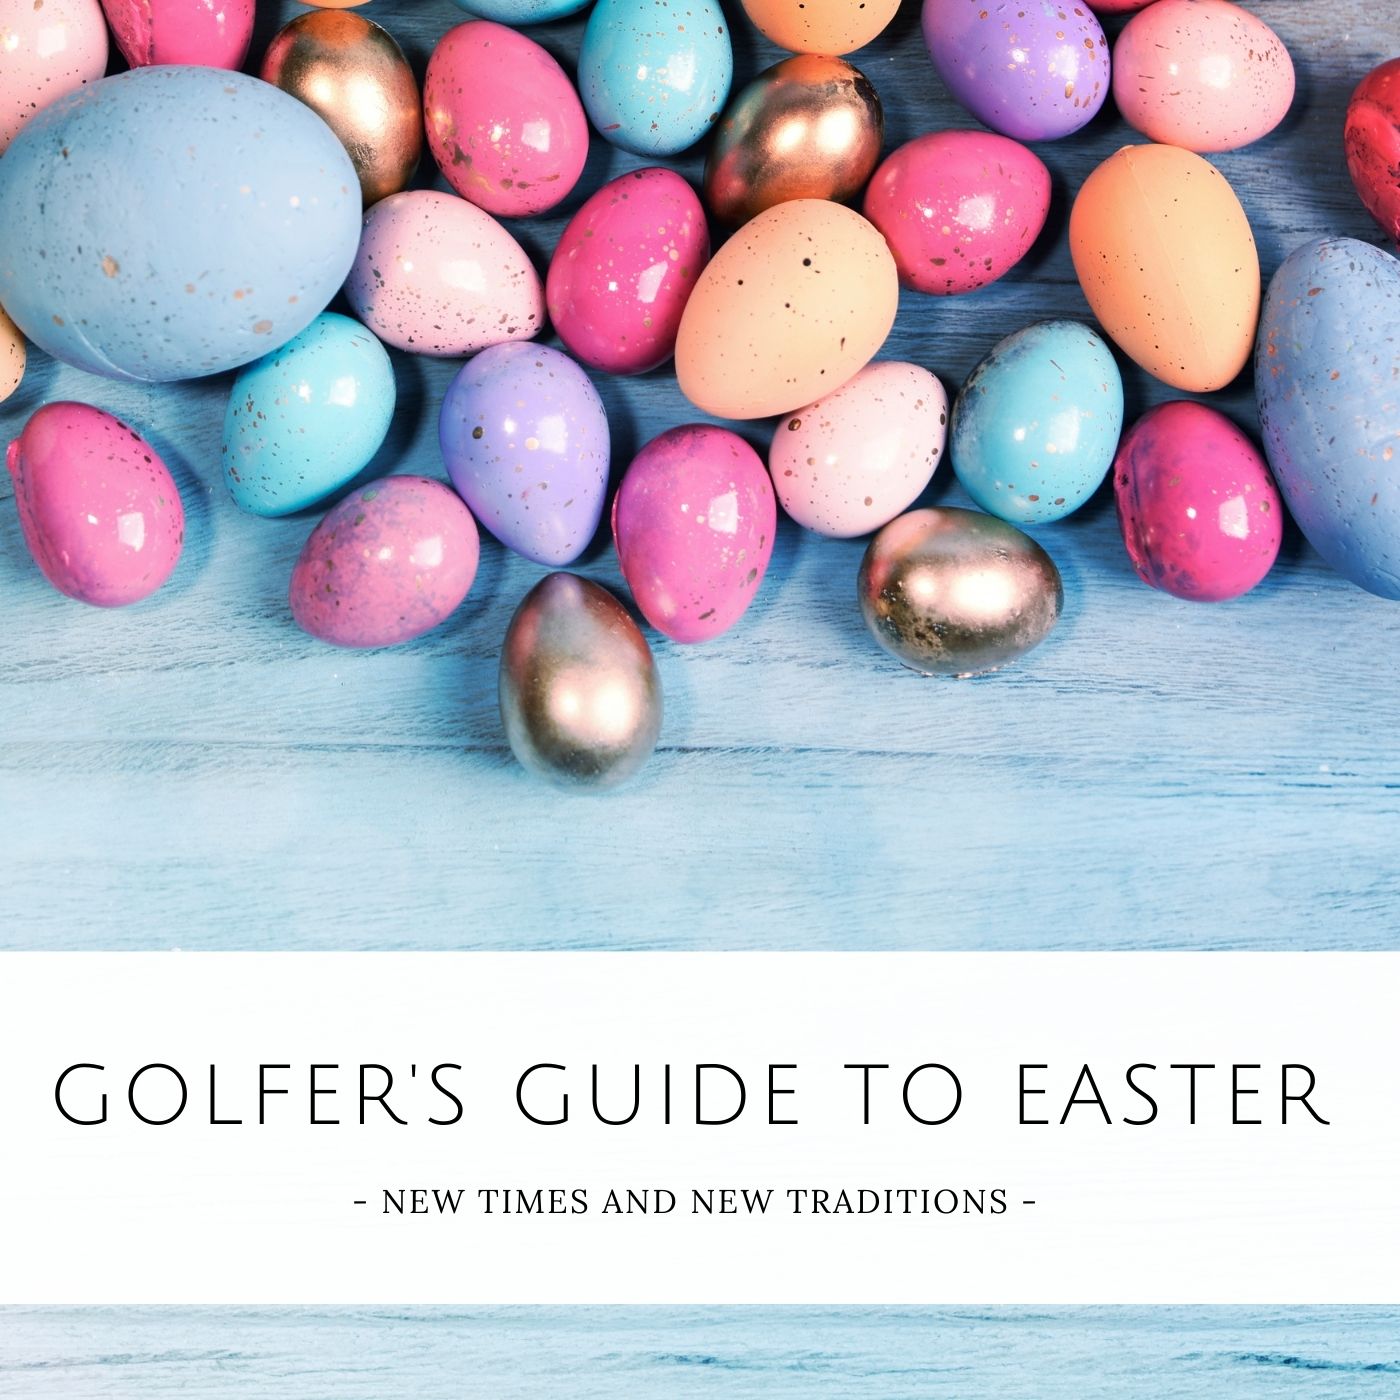 A Golfer's Guide to Easter